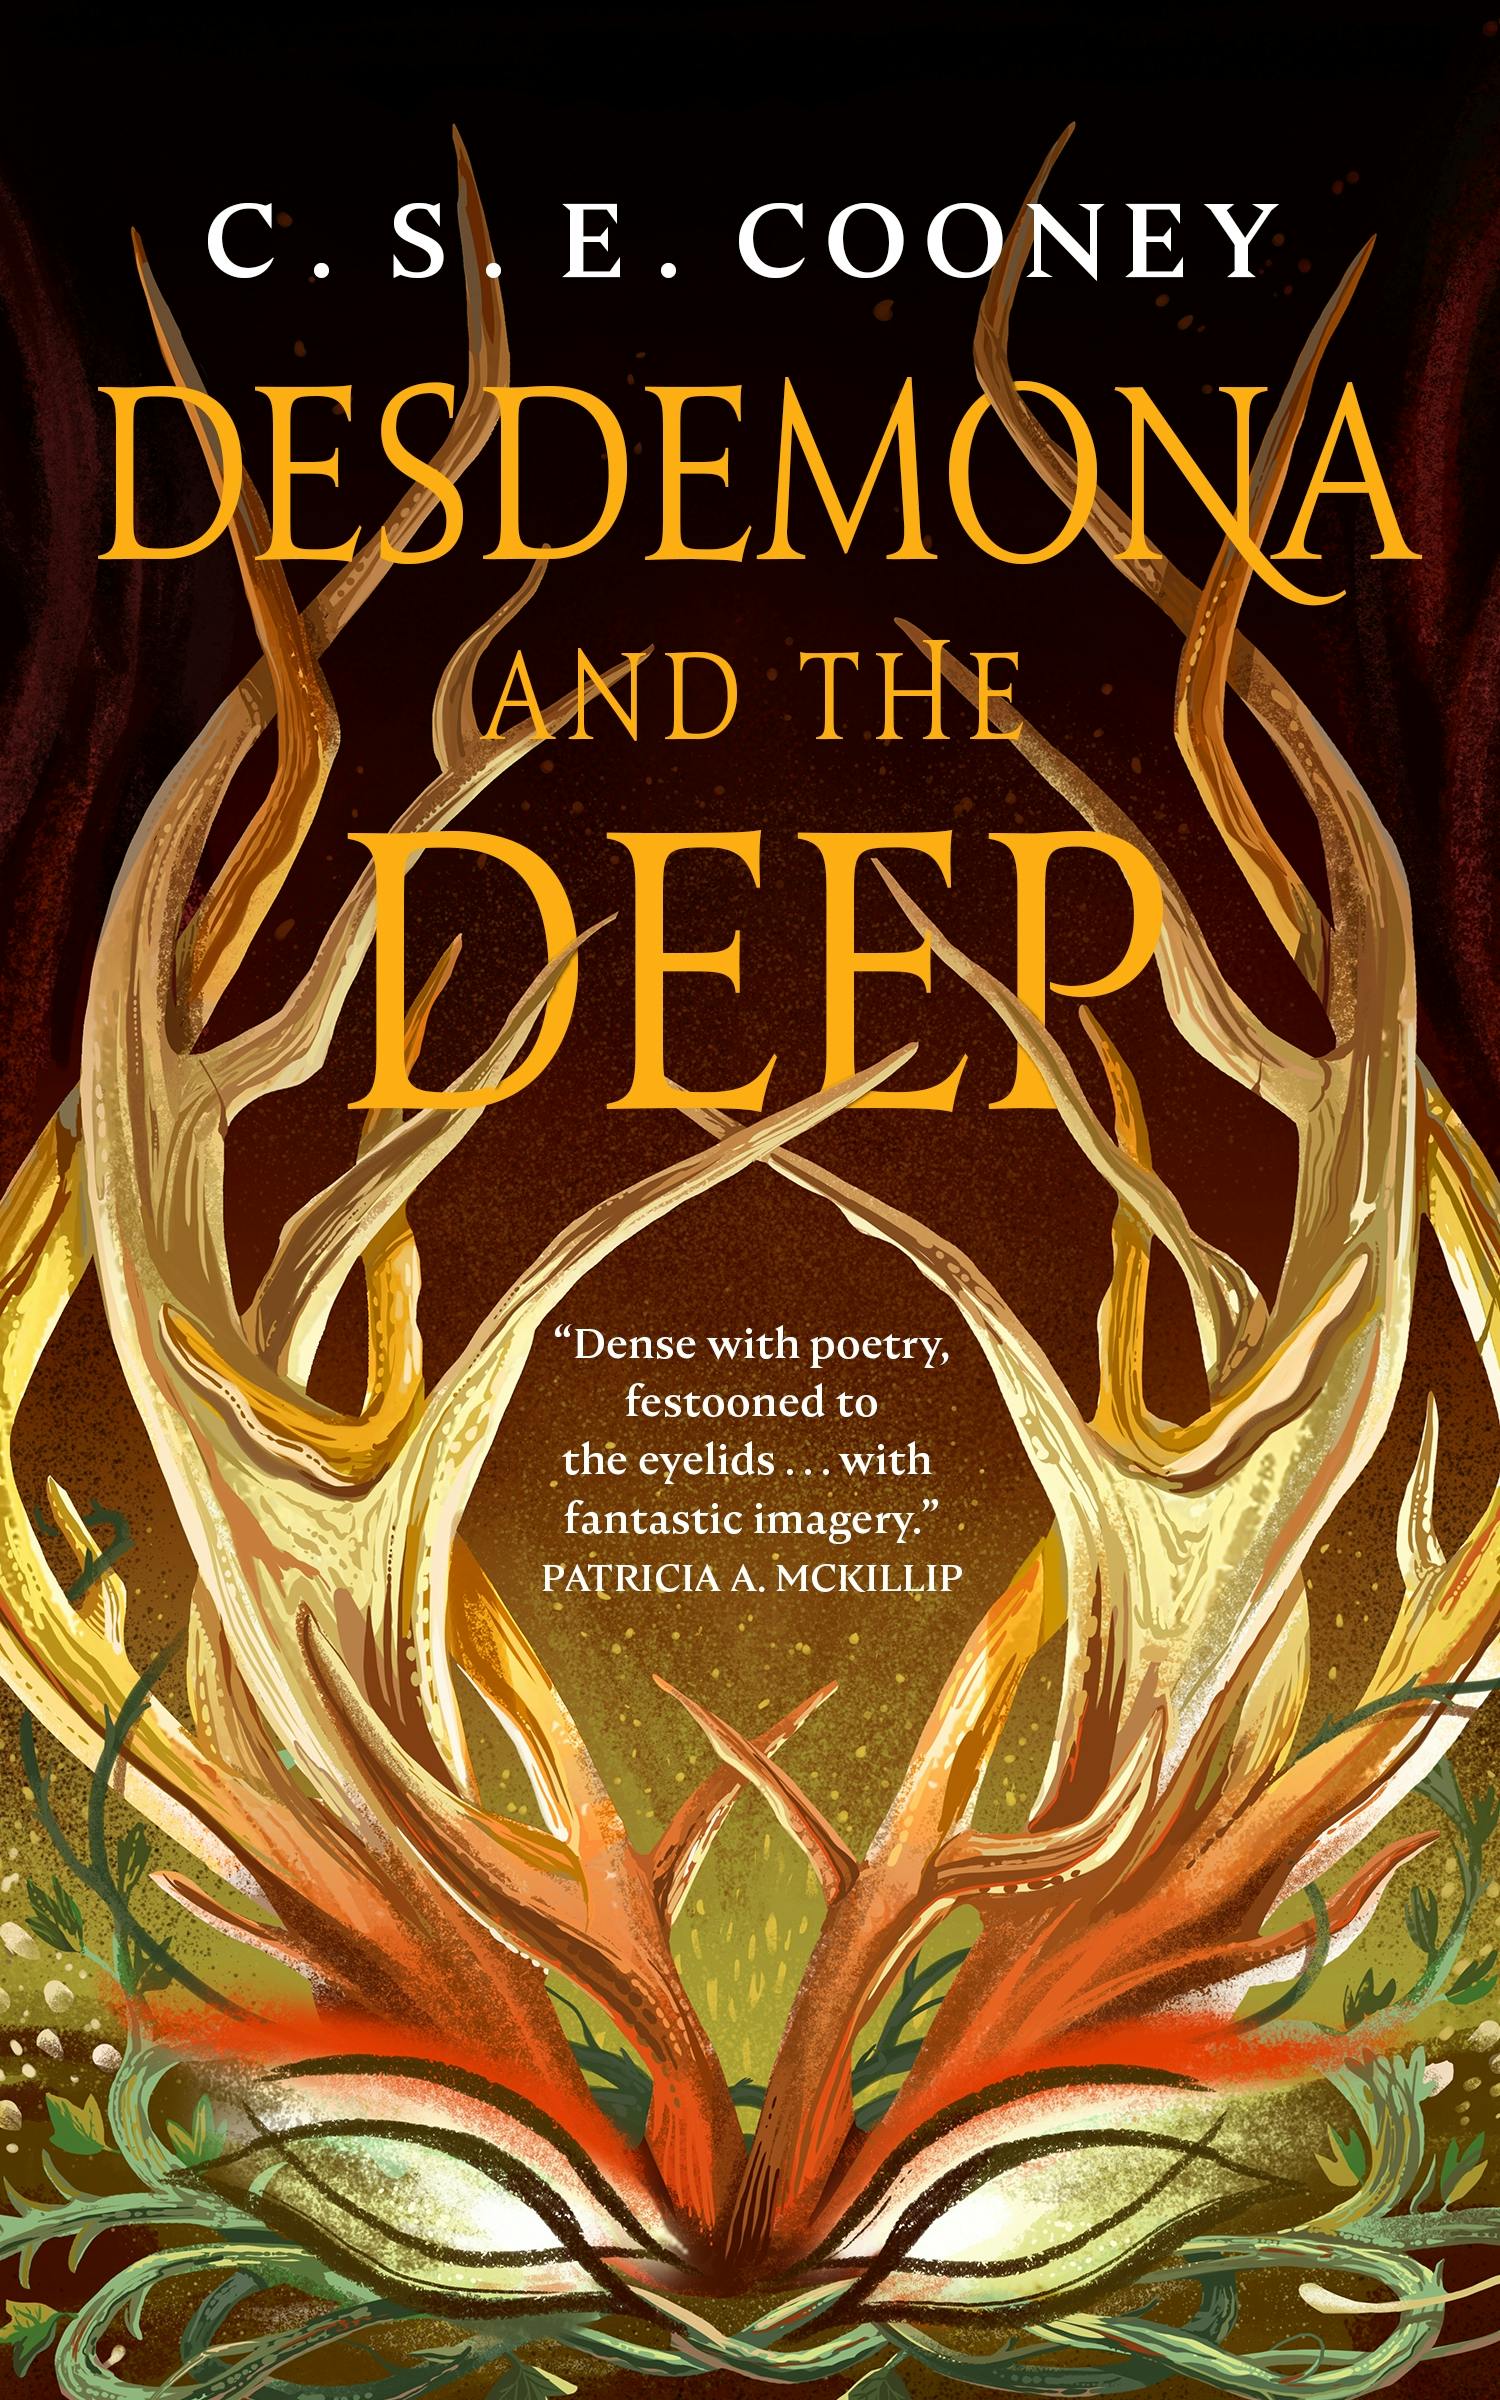 Cover for the book titled as: Desdemona and the Deep